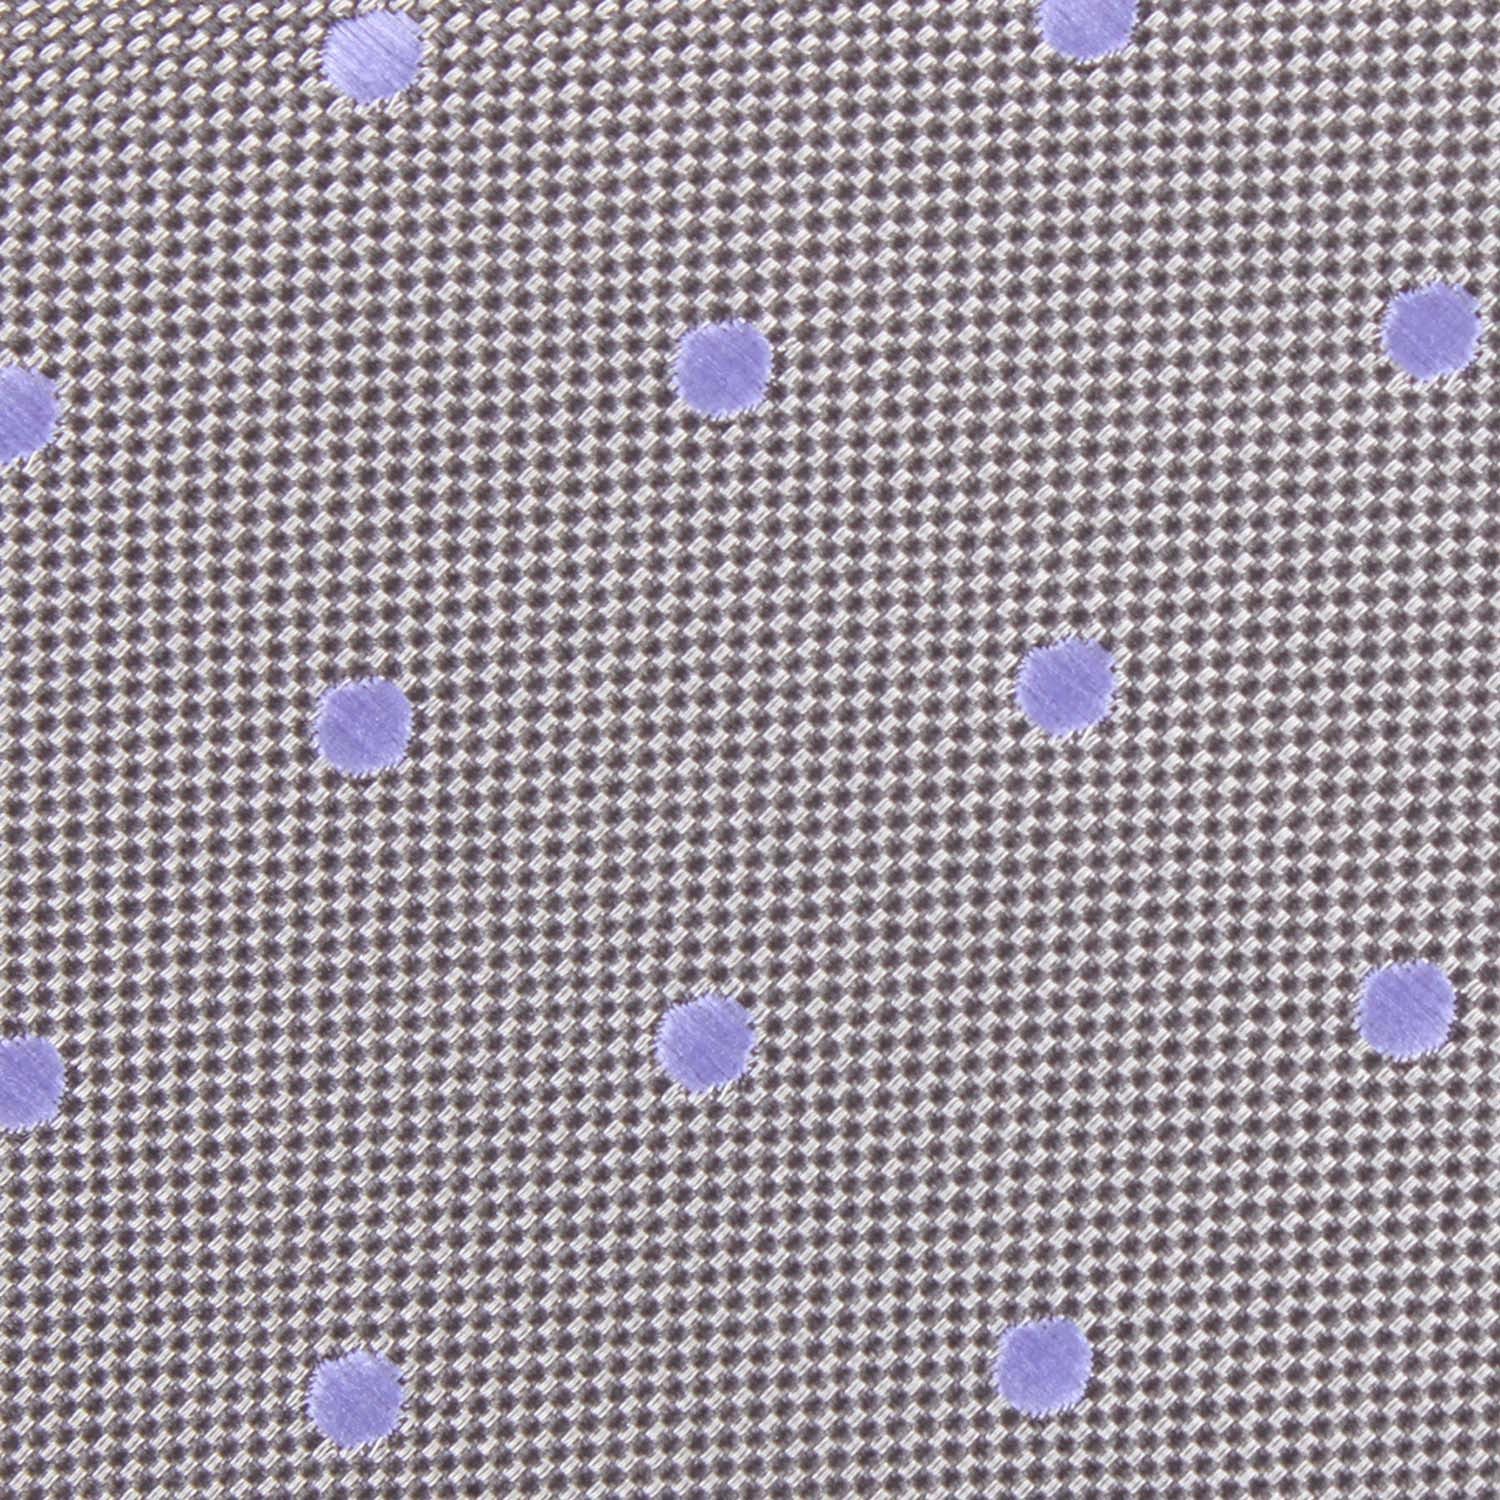 Grey with Lavender Purple Polka Dots Fabric Self Tie Bow Tie M116